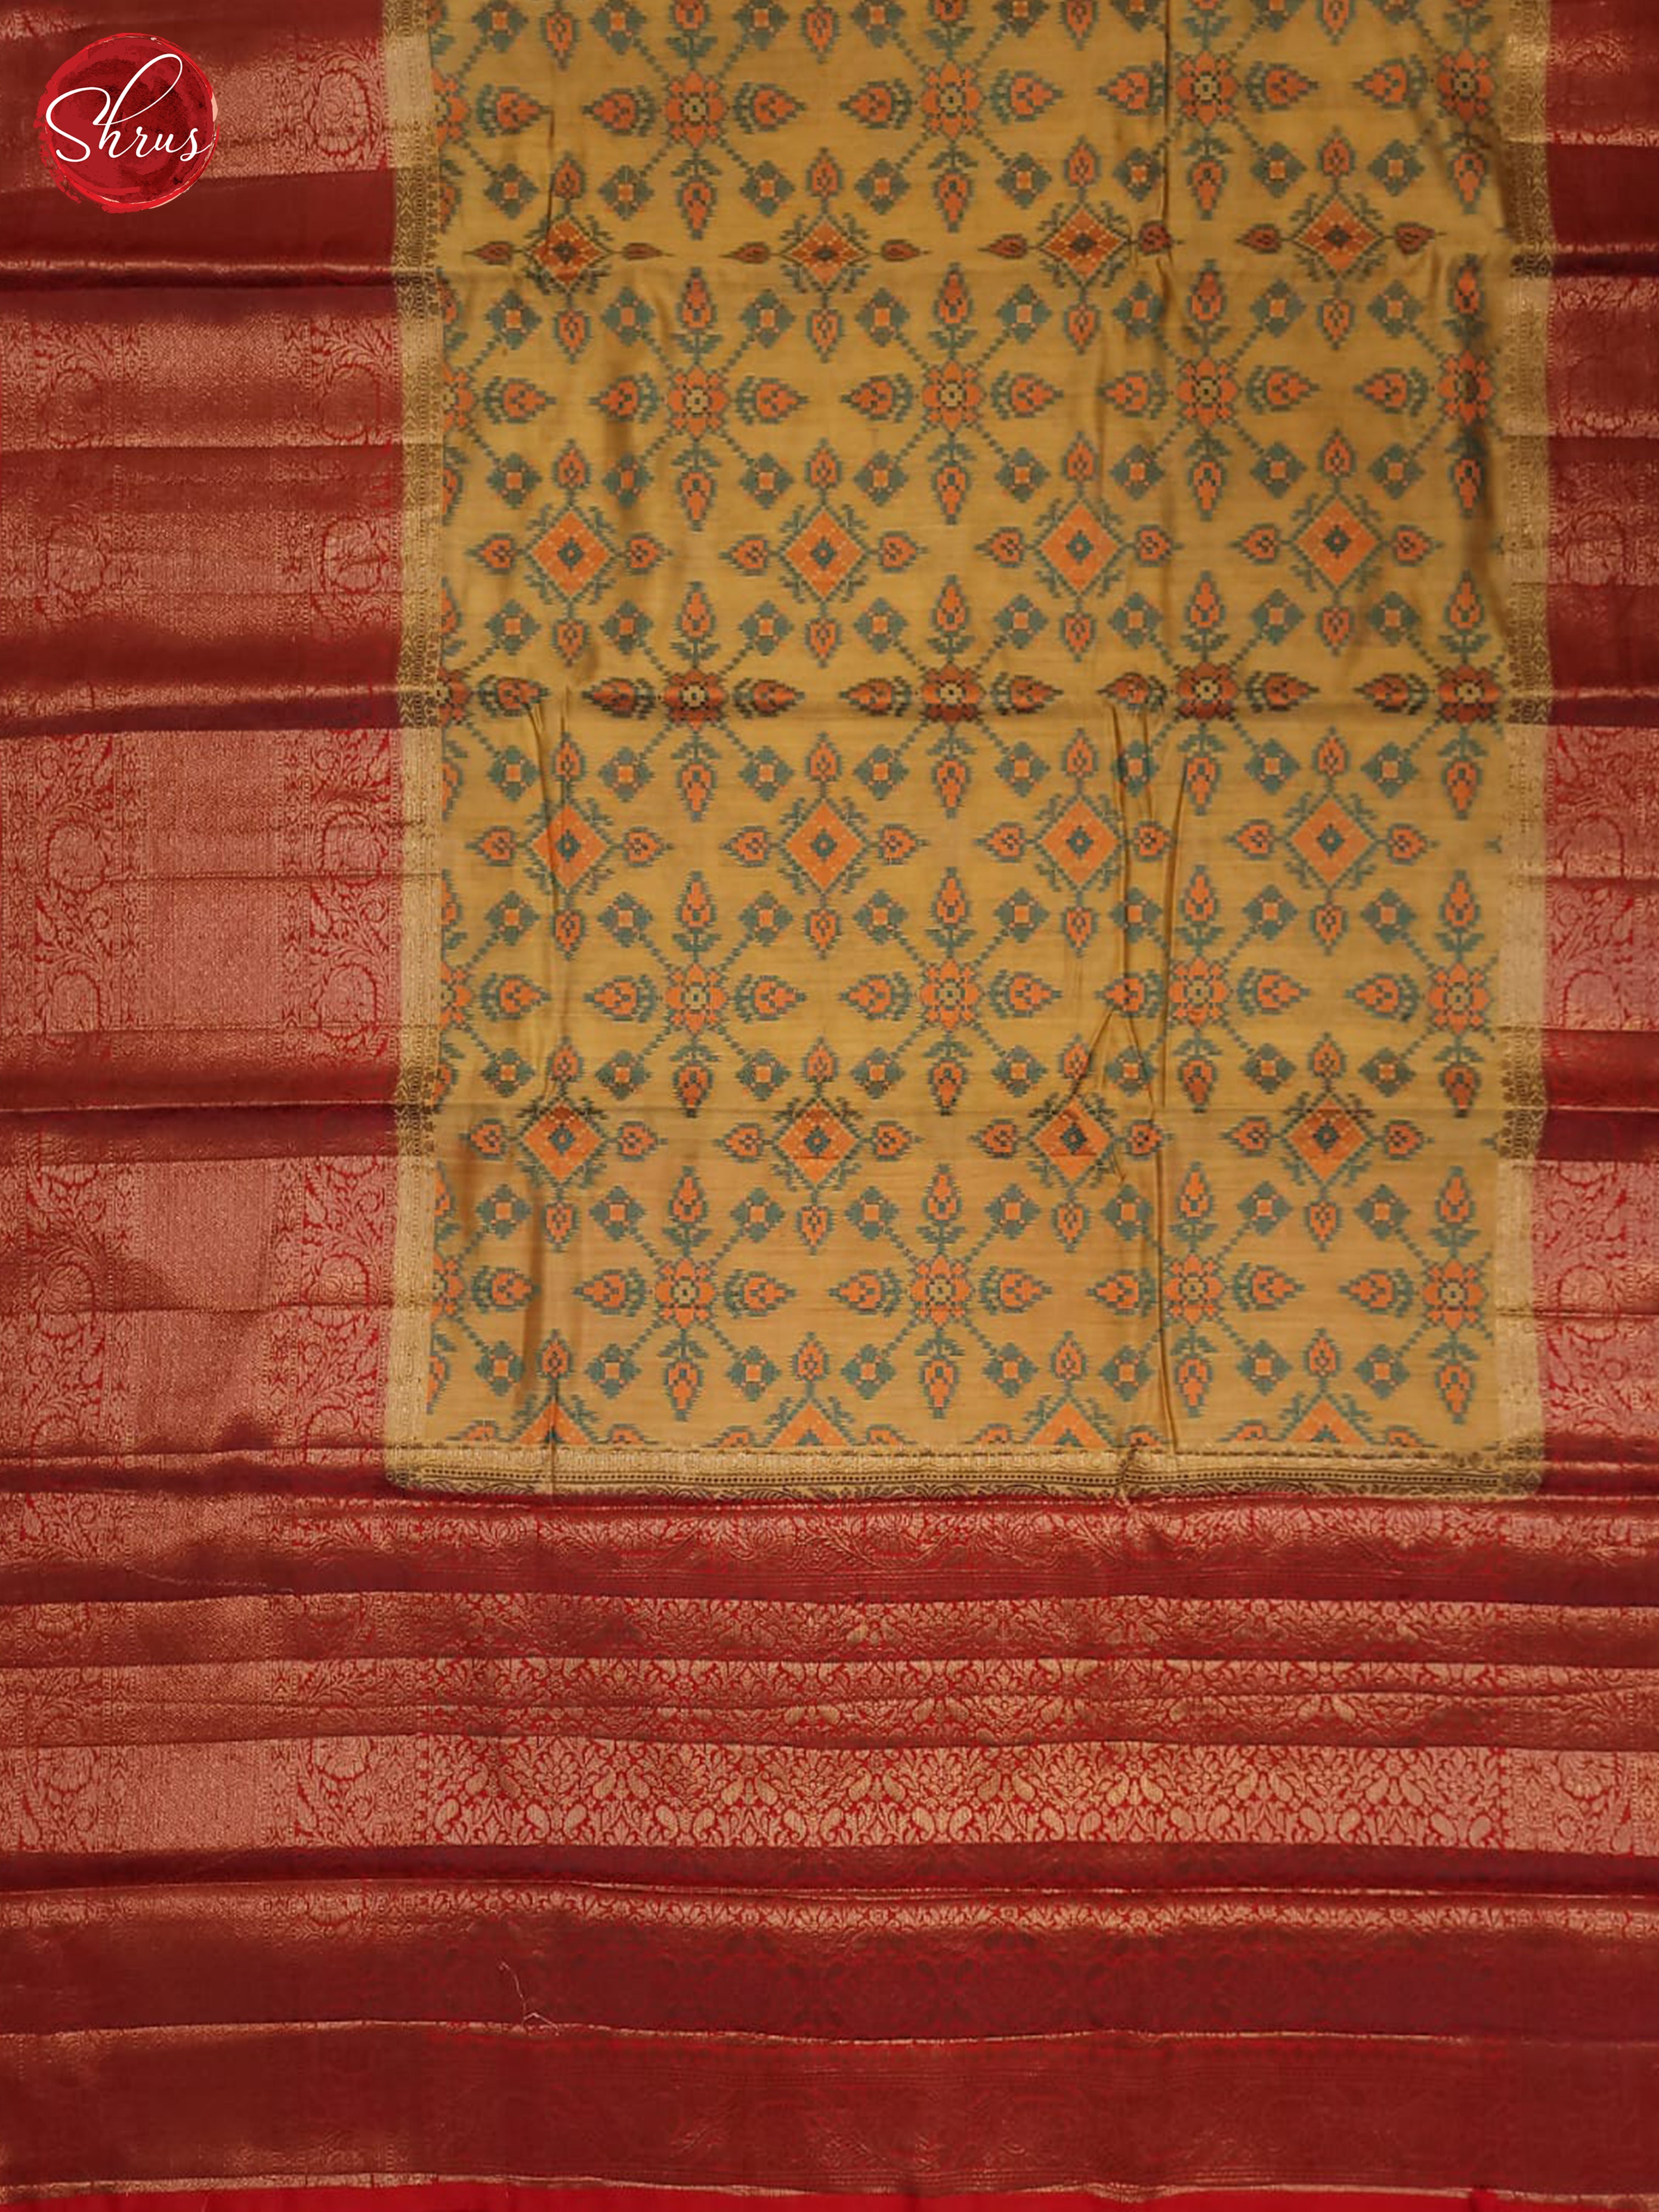 beige and Red-Tussar saree - Shop on ShrusEternity.com